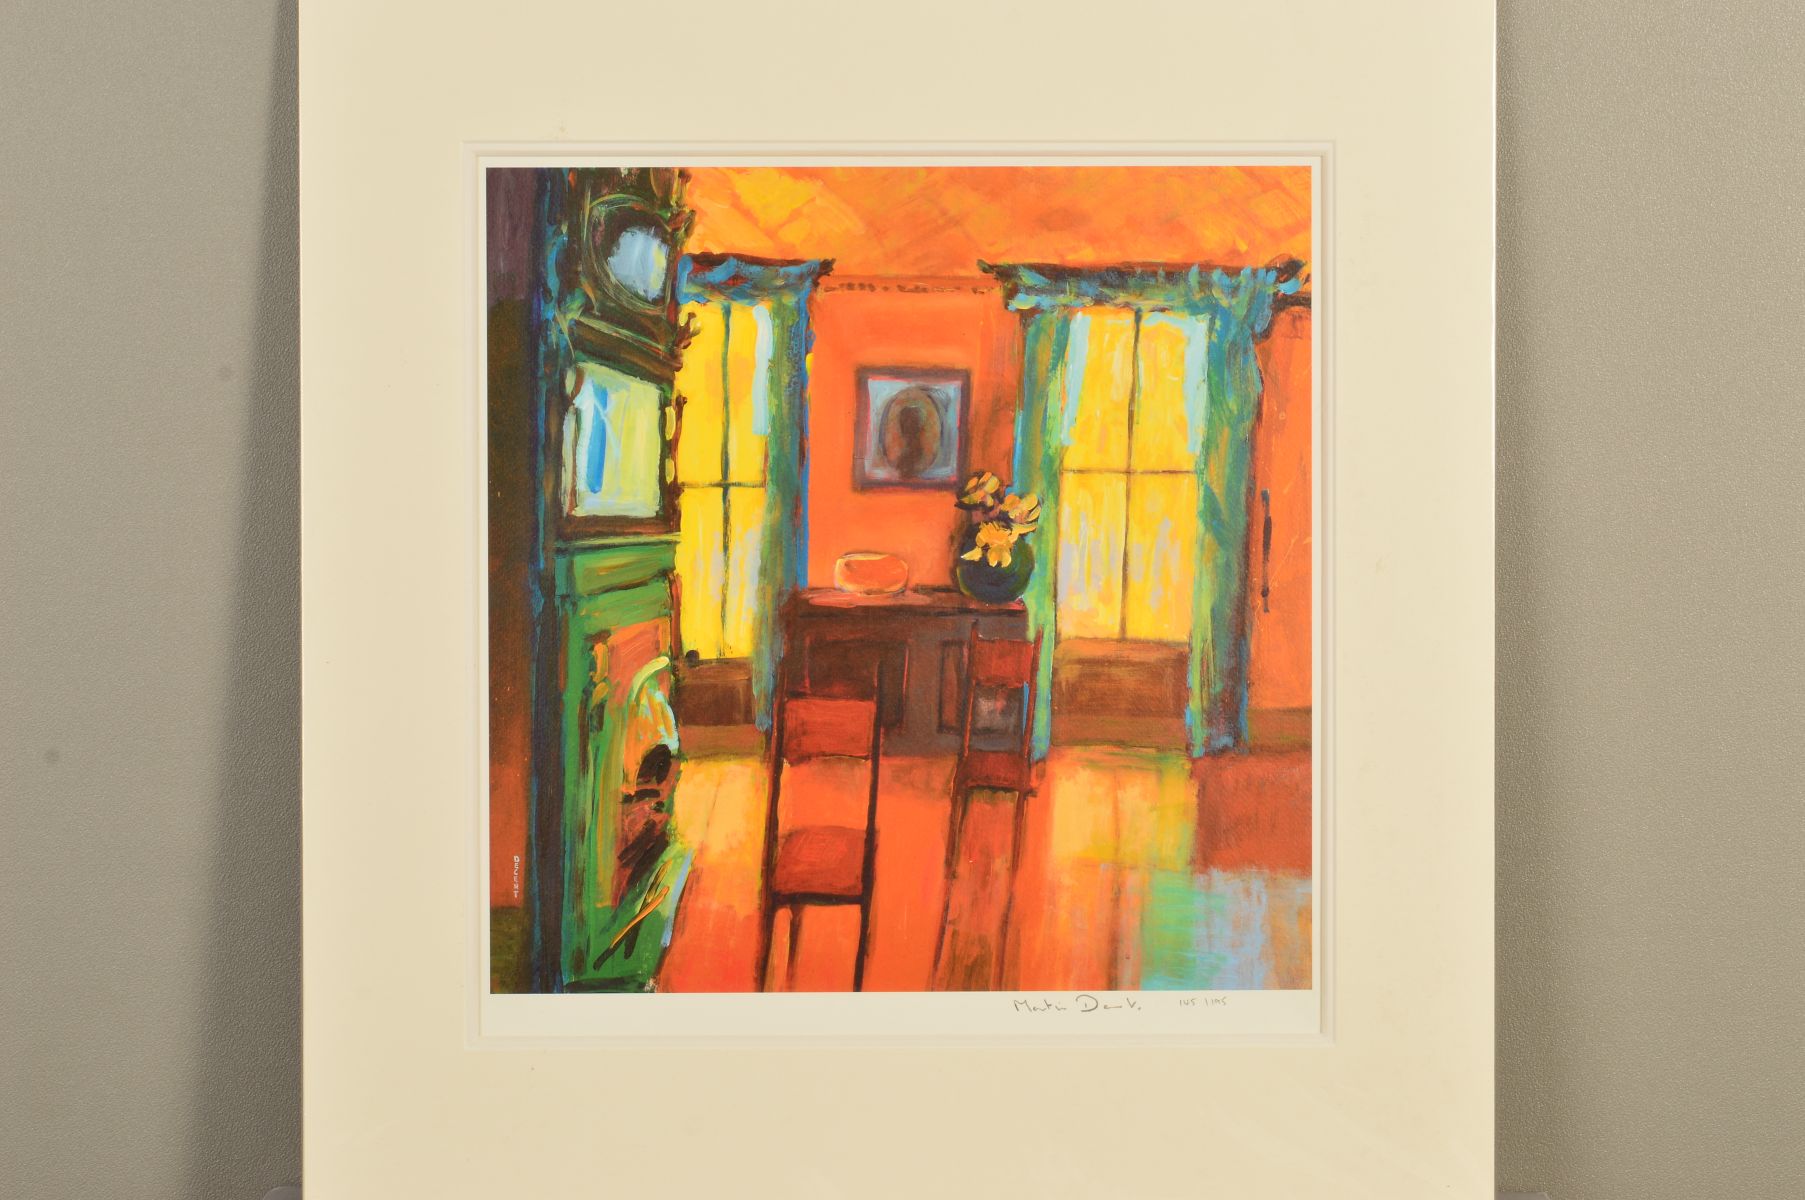 MARTIN DECENT (BRITISH CONTEMPORARY), 'Reflections', a limited edition print of an interior scene,